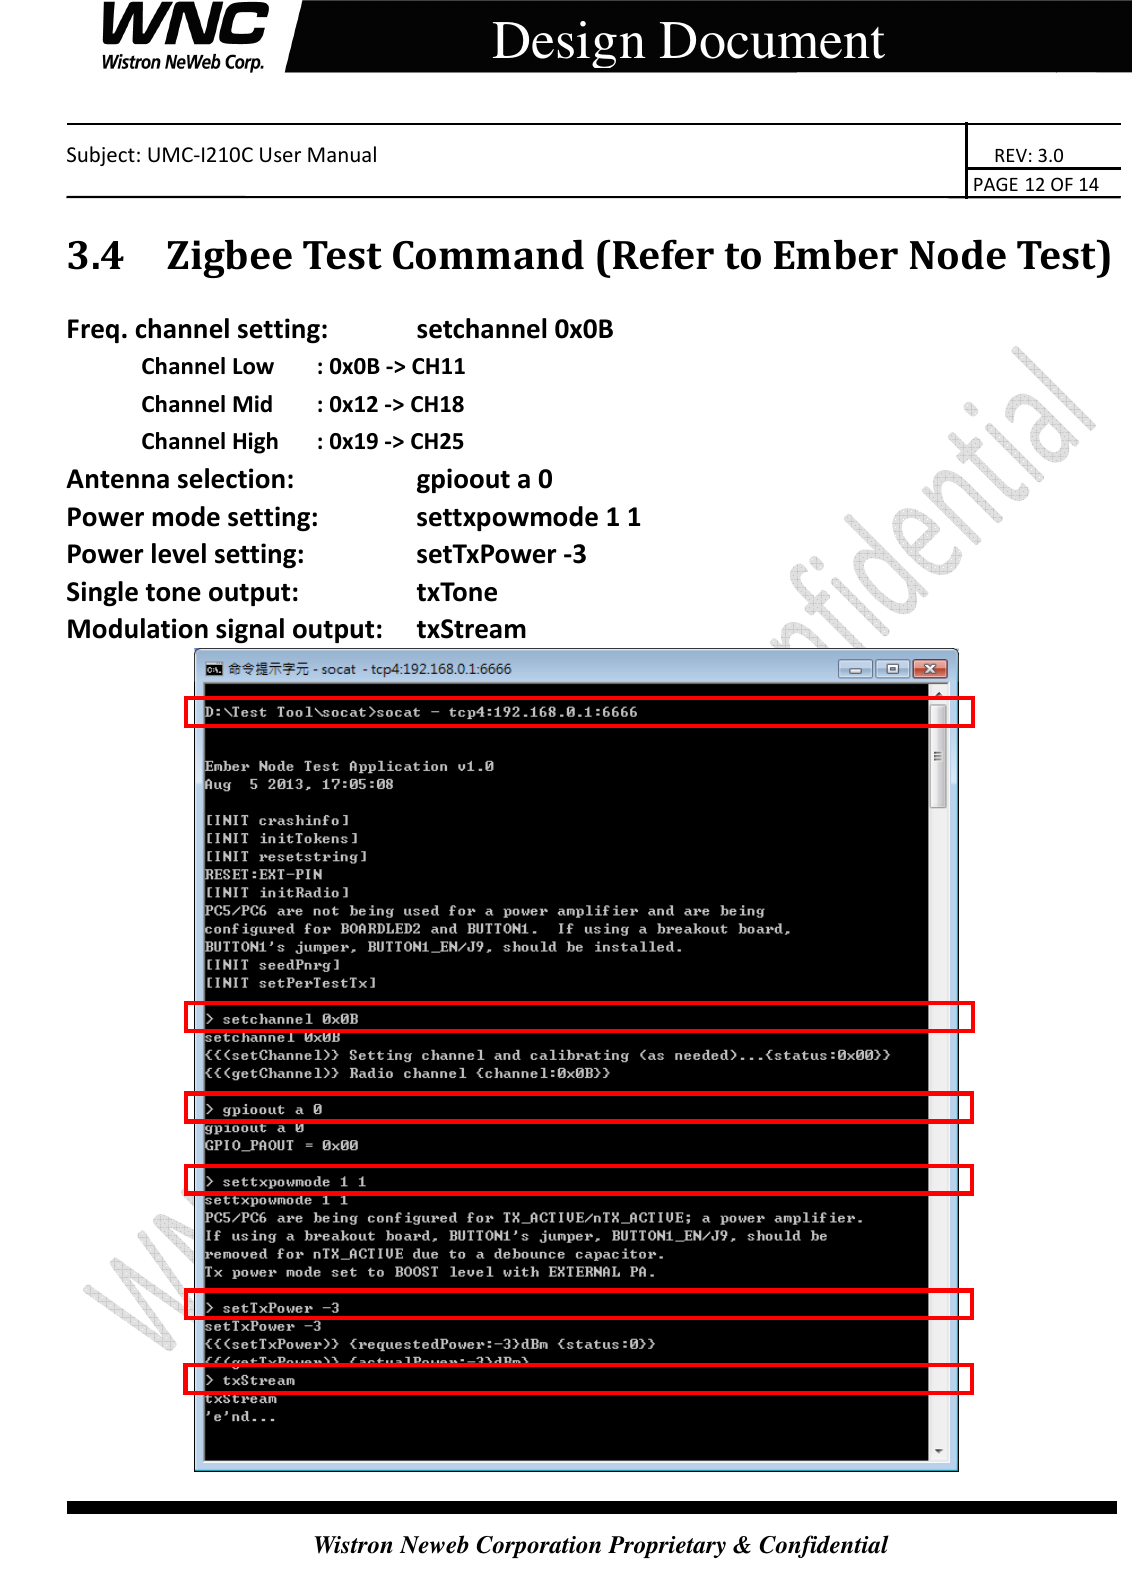    Subject: UMC-I210C User Manual                                                                       REV: 3.0                                                                                                                                                                               PAGE 12 OF 14  Wistron Neweb Corporation Proprietary &amp; Confidential     Design Document 3.4 Zigbee Test Command (Refer to Ember Node Test) Freq. channel setting:    setchannel 0x0B Channel Low  : 0x0B -&gt; CH11   Channel Mid  : 0x12 -&gt; CH18   Channel High  : 0x19 -&gt; CH25 Antenna selection:      gpioout a 0 Power mode setting:    settxpowmode 1 1 Power level setting:      setTxPower -3 Single tone output:      txTone Modulation signal output:  txStream  